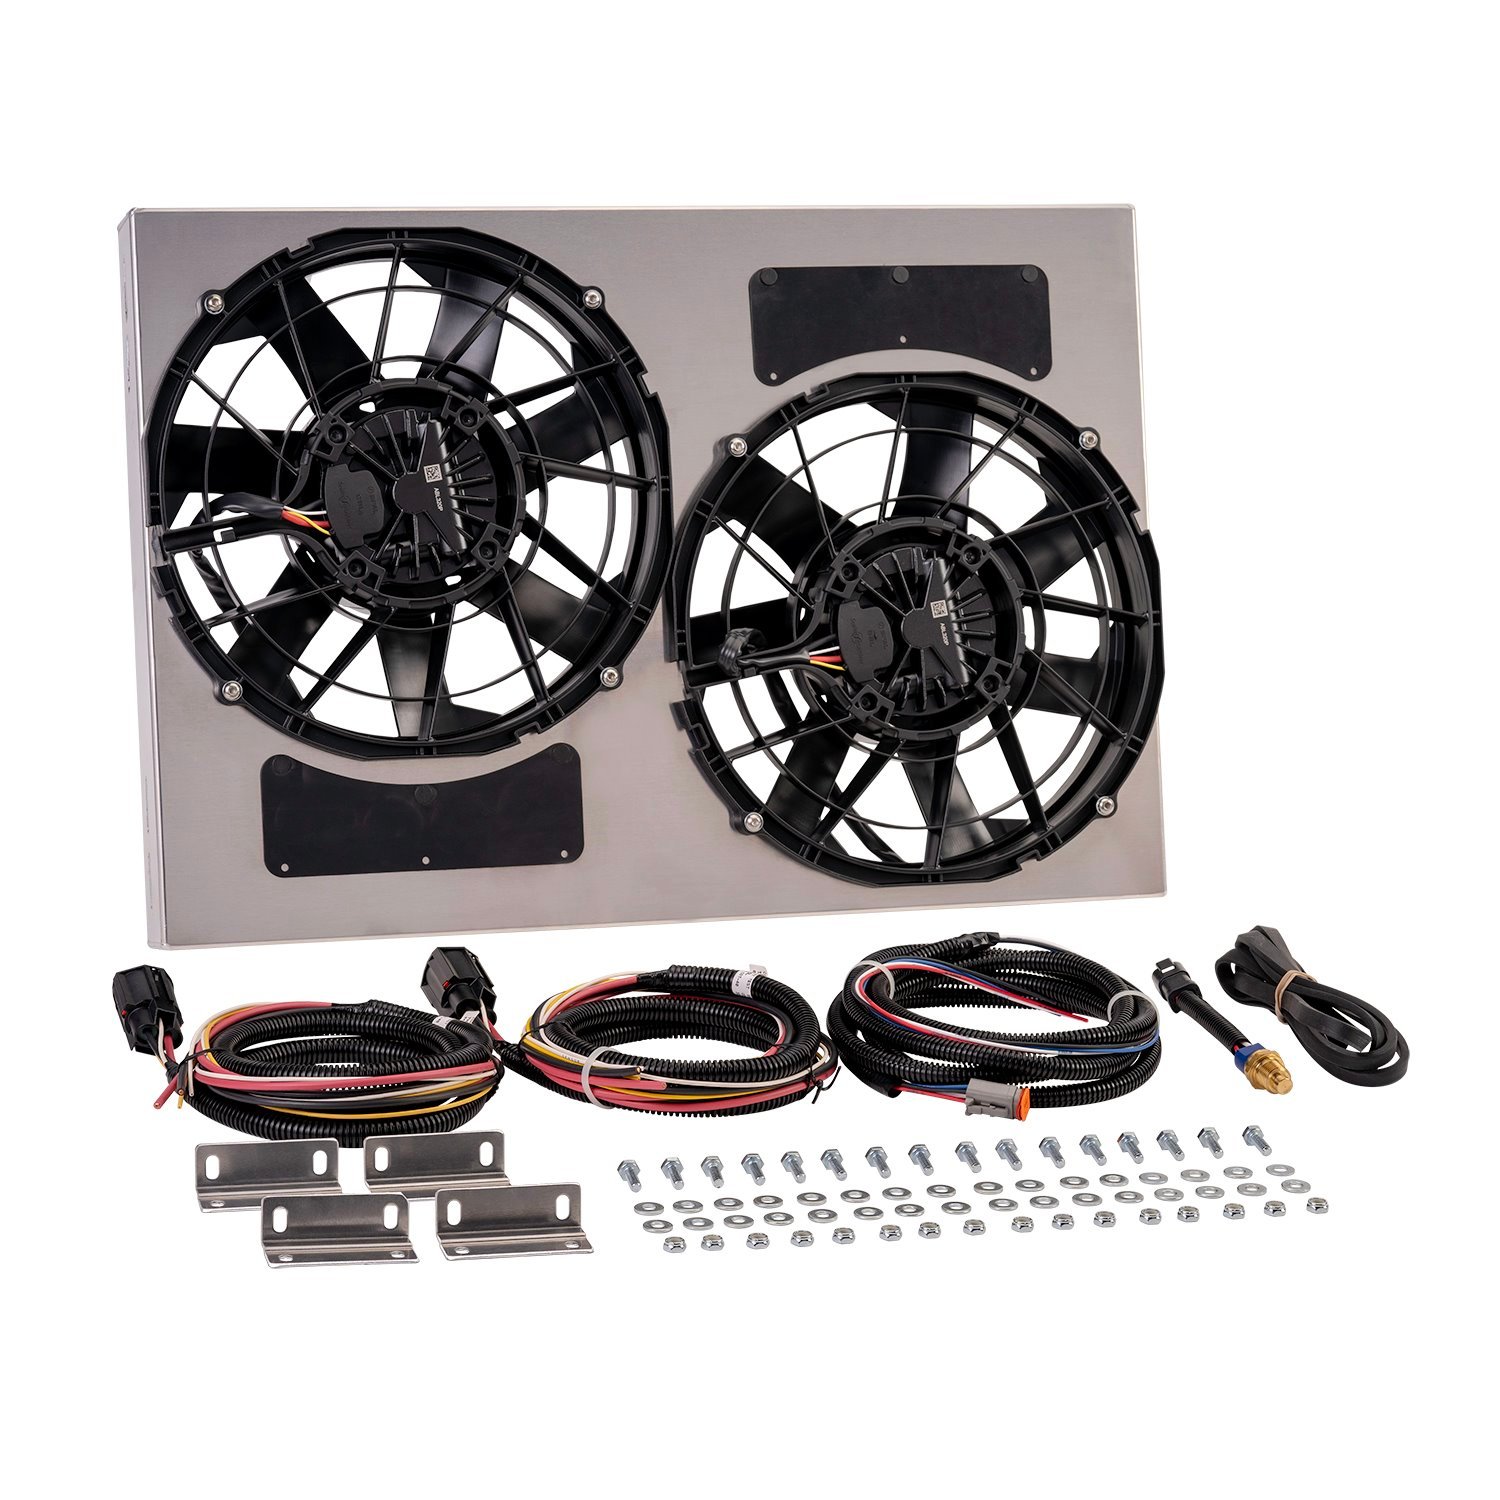 67938-185 Brushless Dual Powerpack 12 in. Radiator Fan Assembly with Integrated 185 Degree PWM Controller